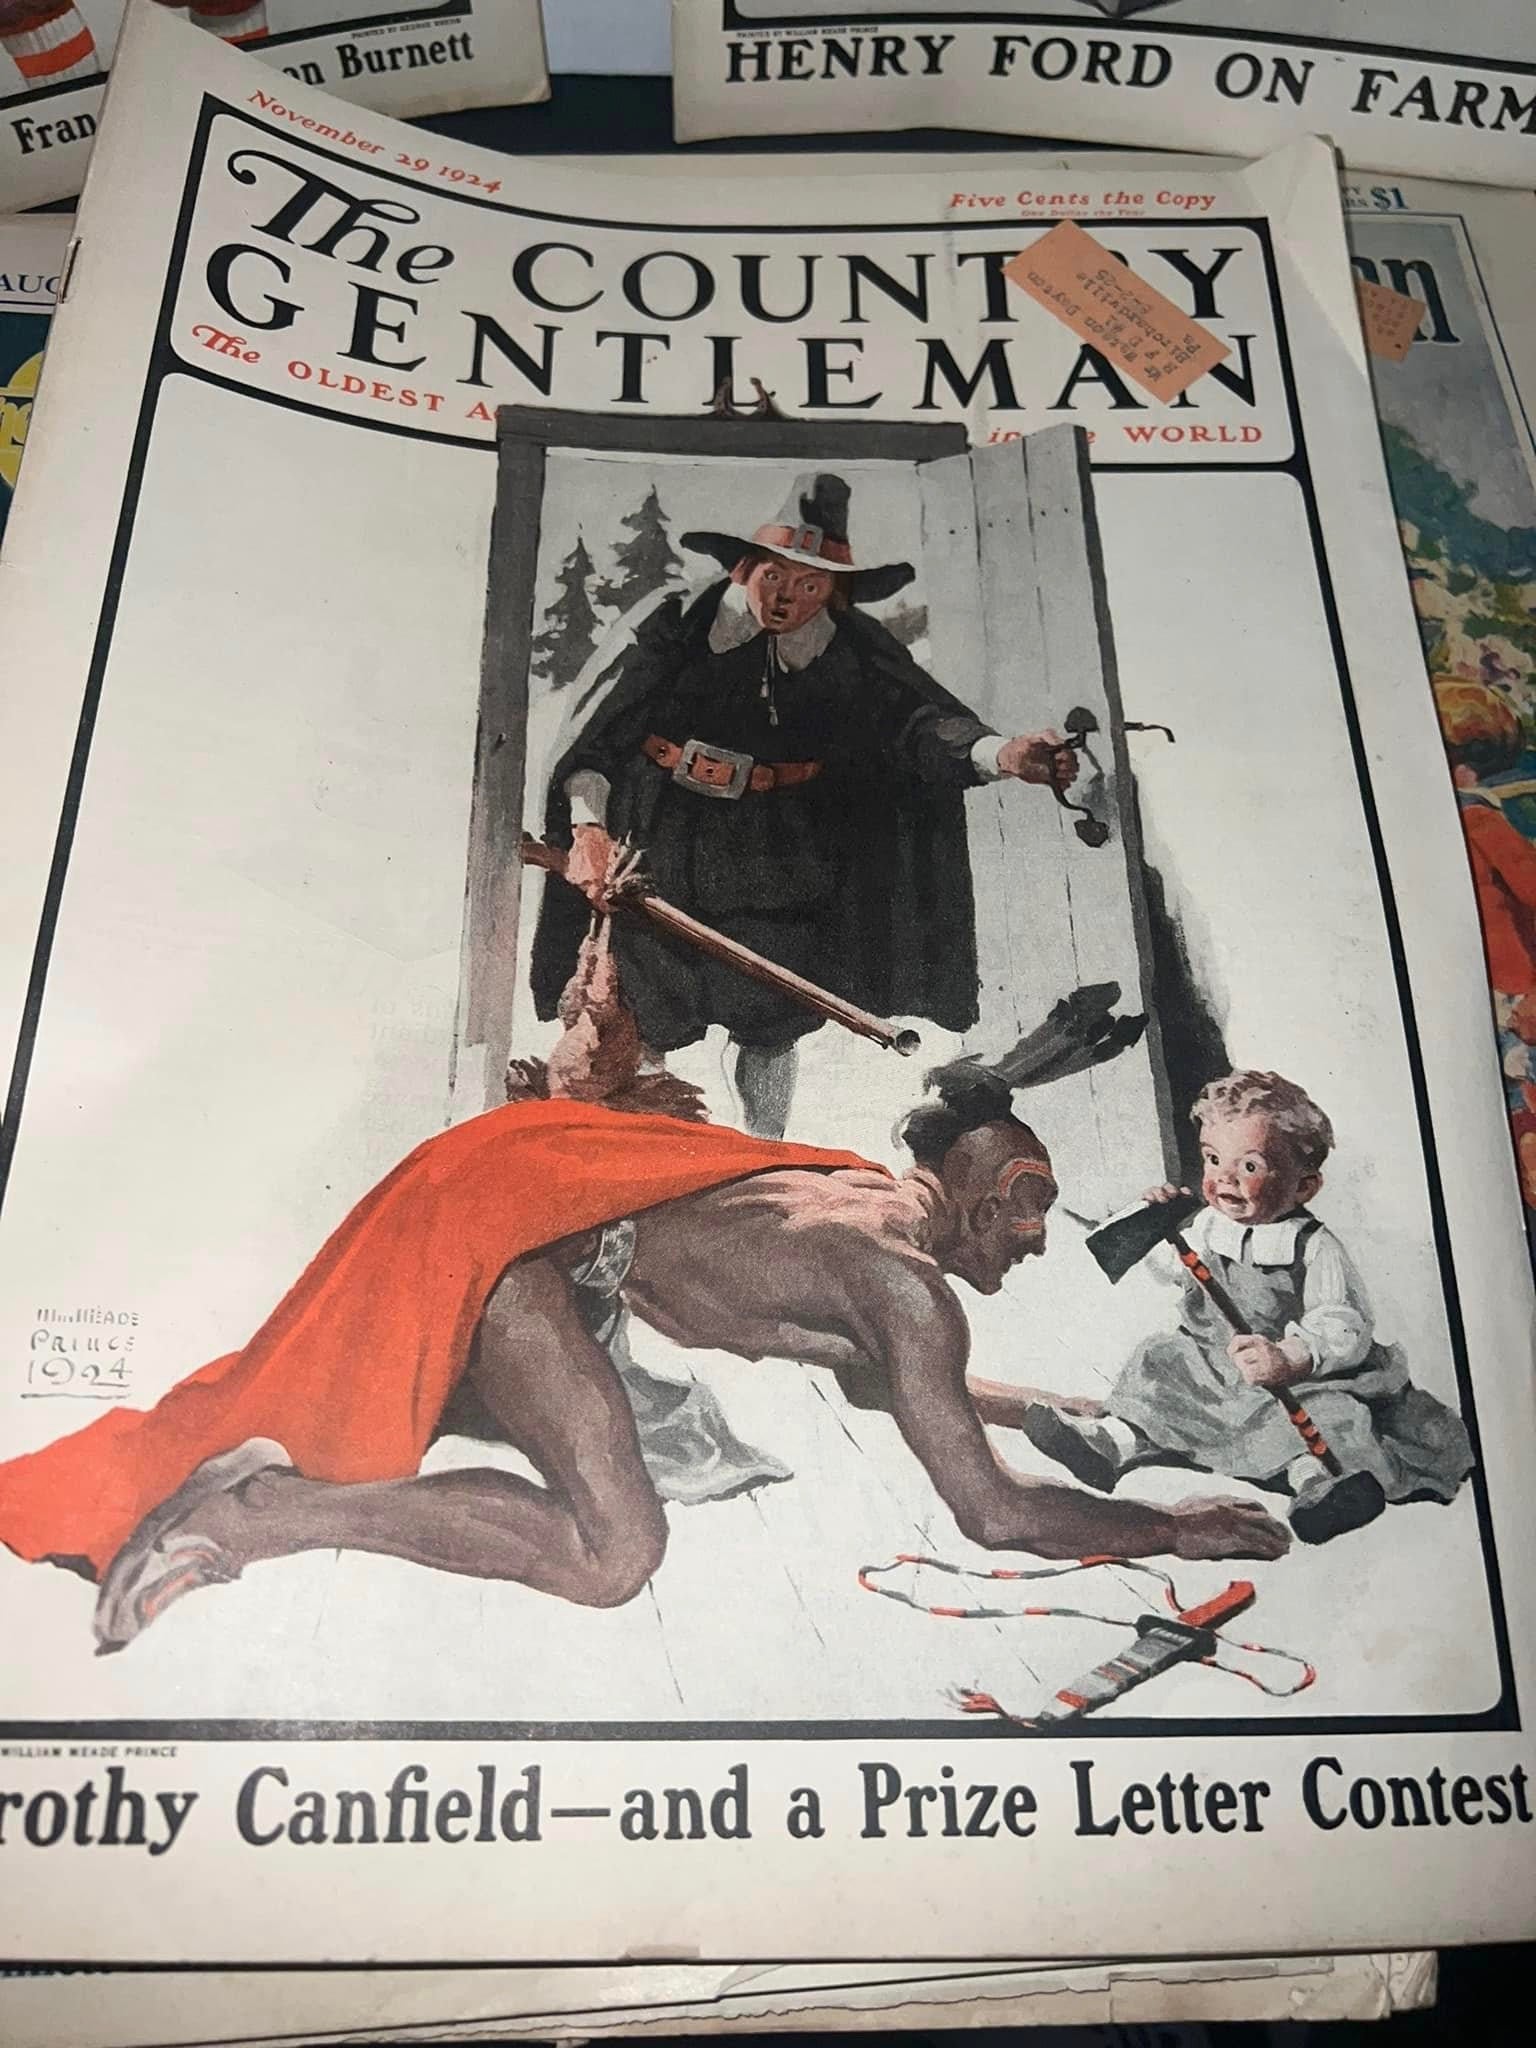 Antique magazine advertising Awesome collection of country gentleman magazines 1924-1926 — 11 volumes art deco era amazing advertising